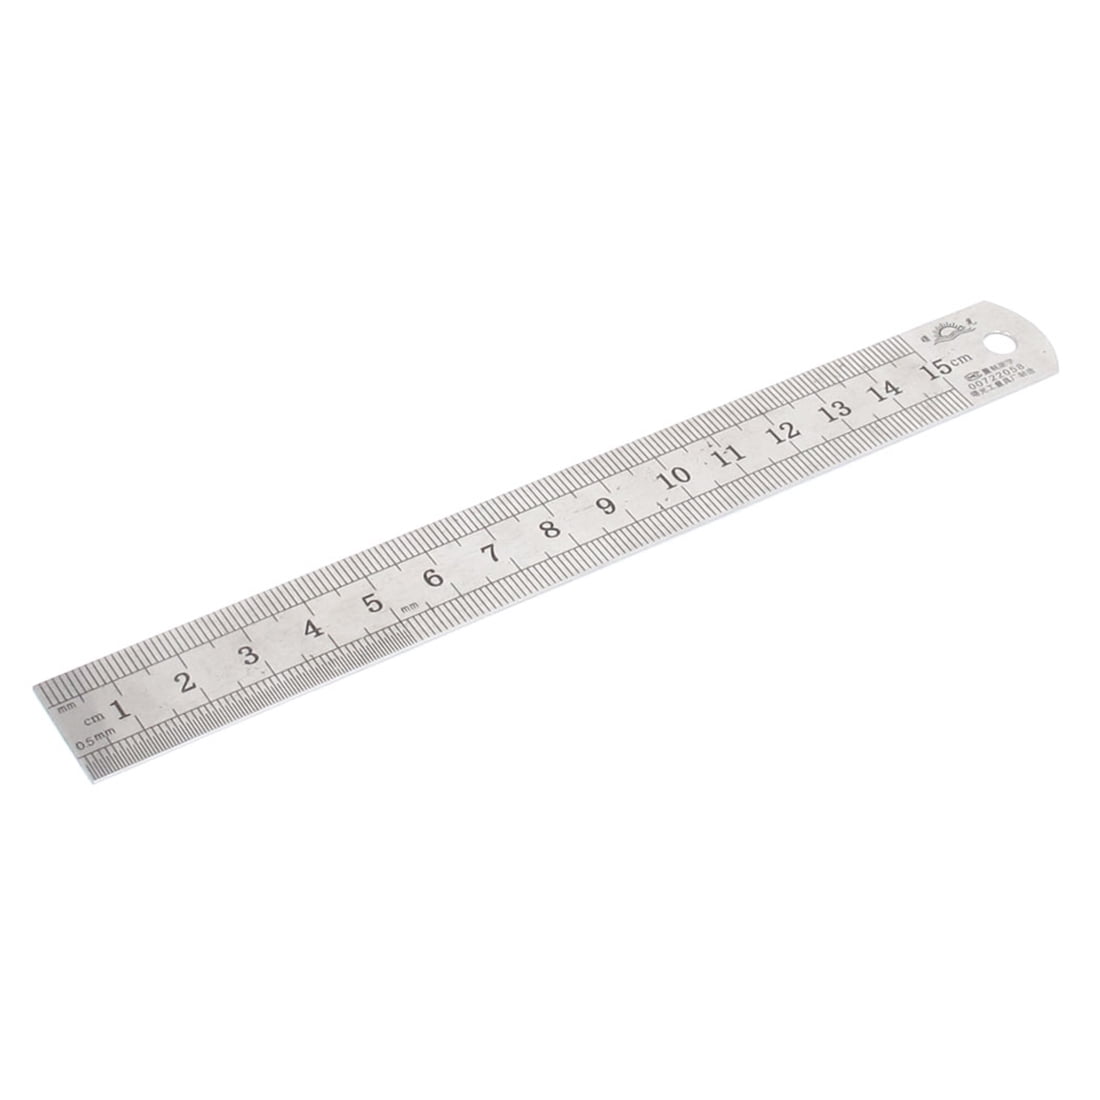 Details about   Straight Ruler Measuring Tool 15cm 6 Inch Metric Inch Plastic for Office